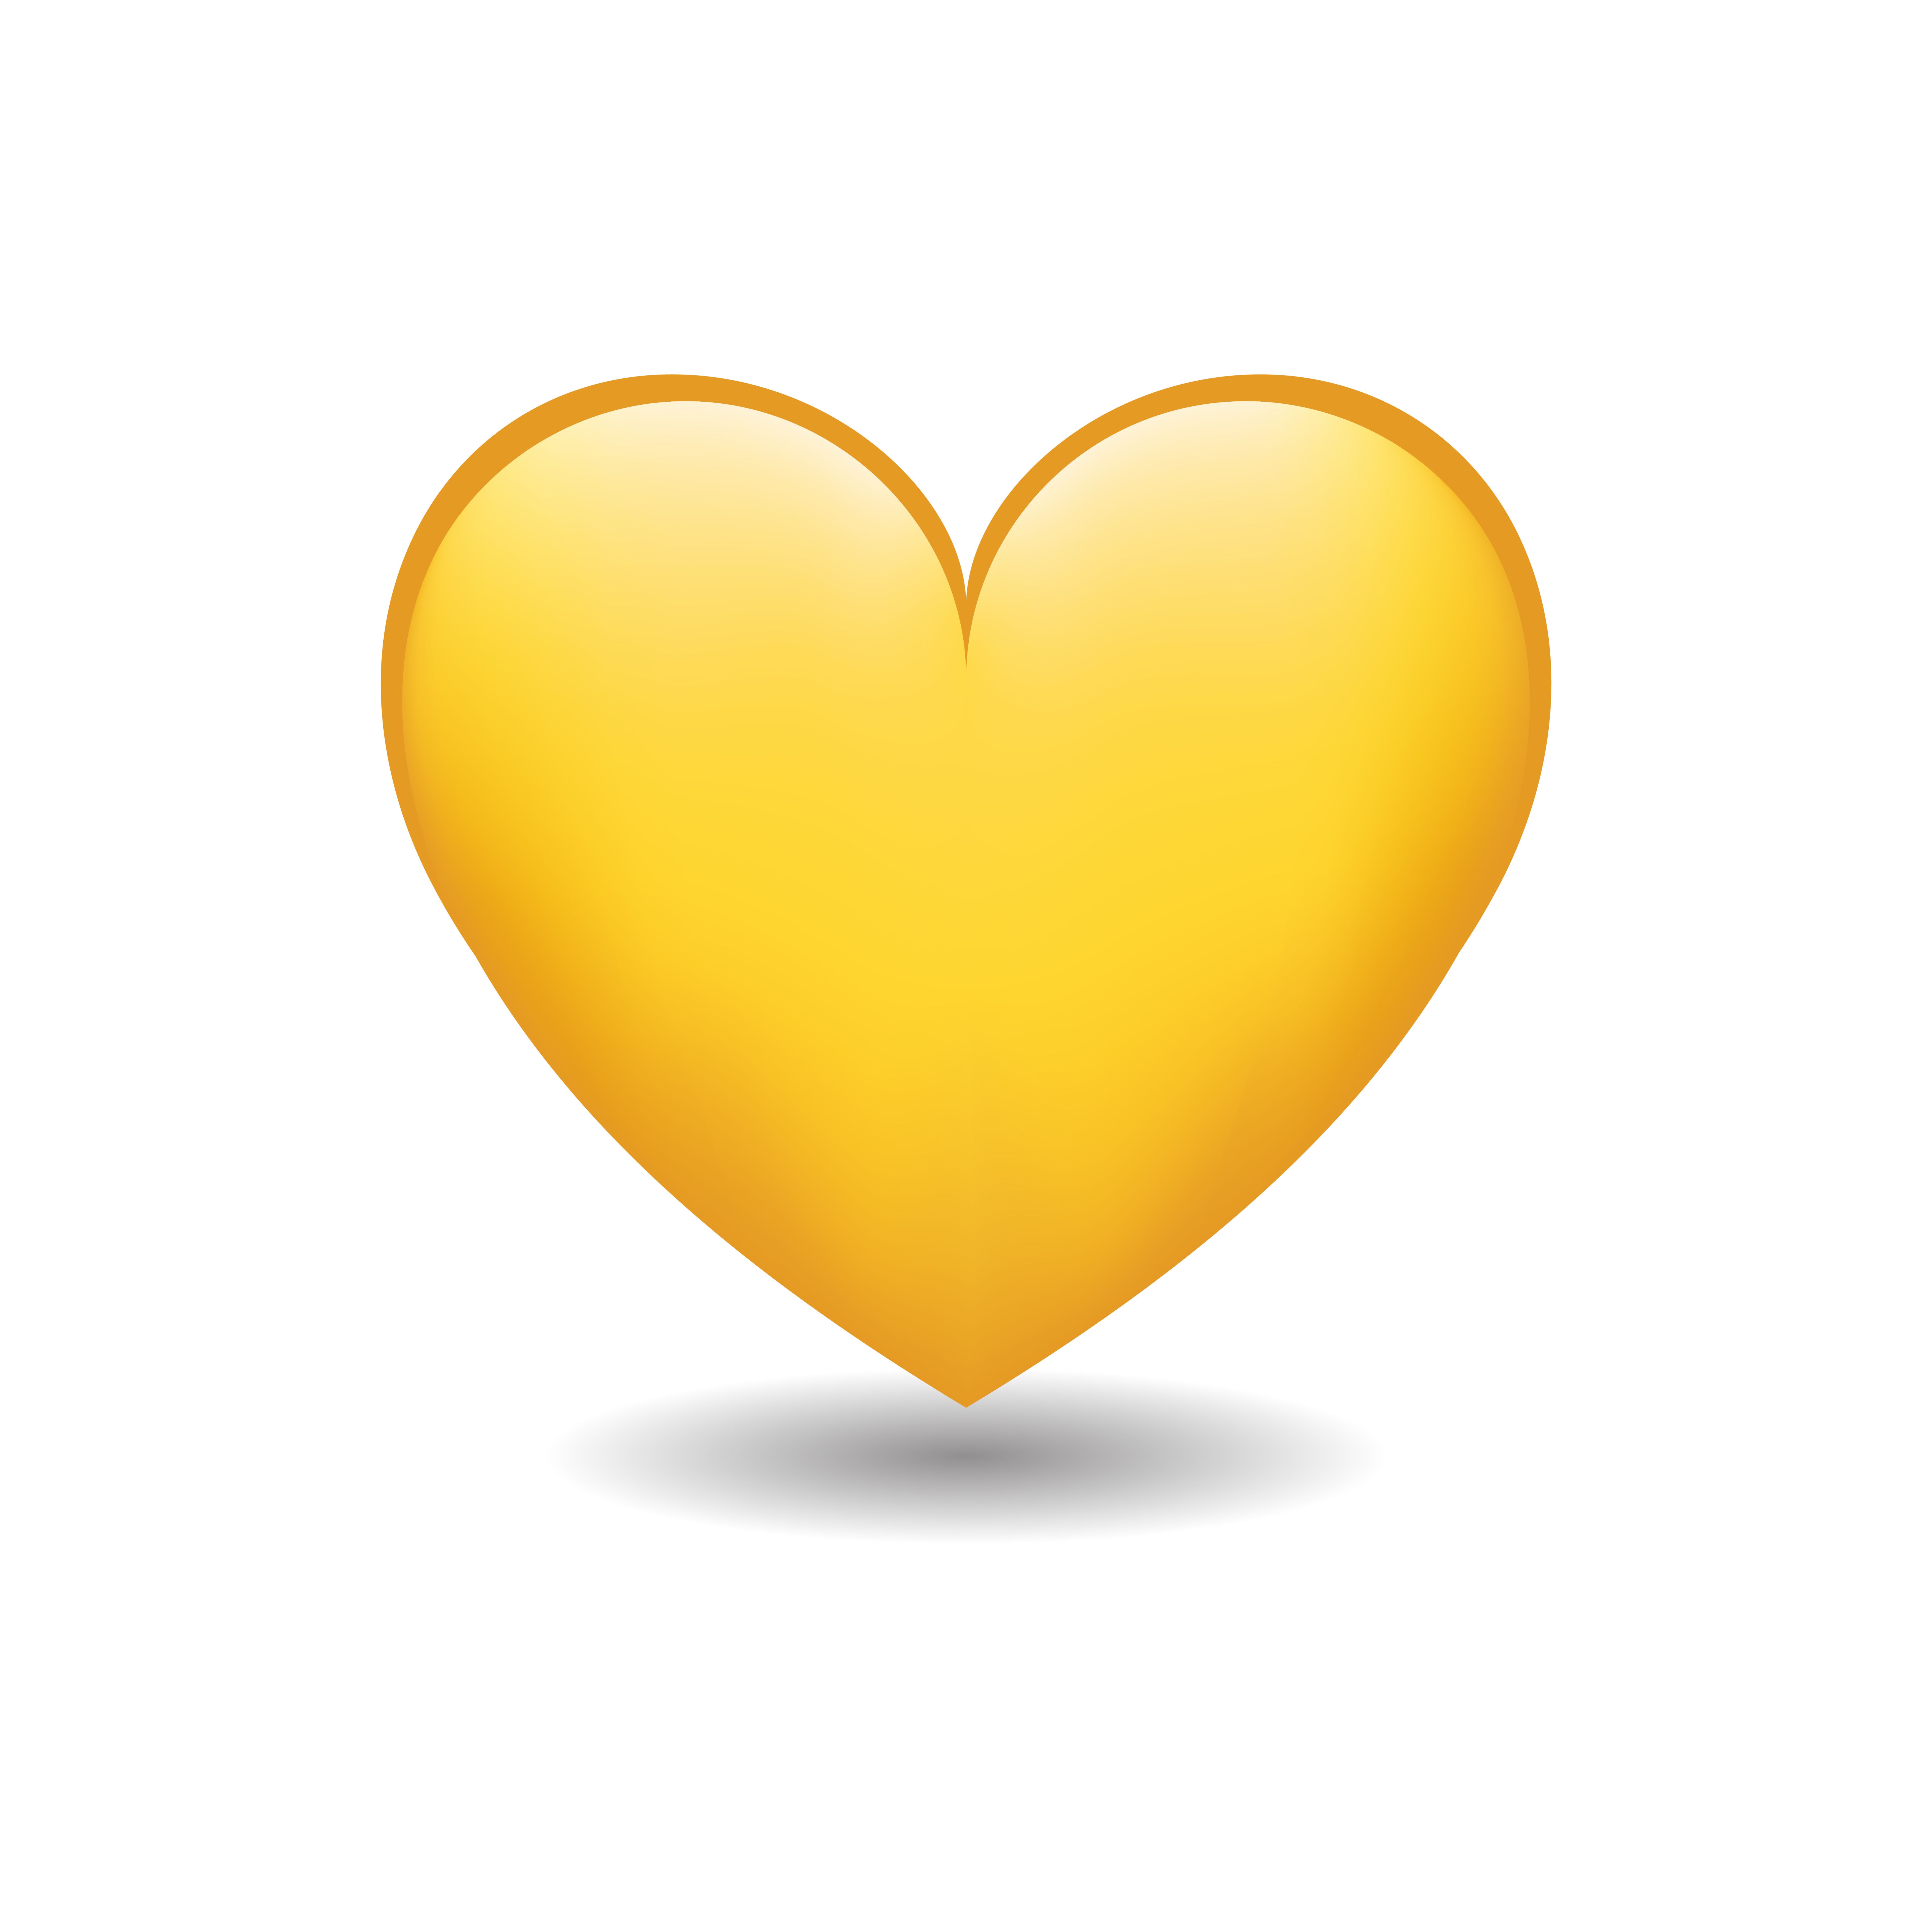 What does the sparkle heart emoji mean?